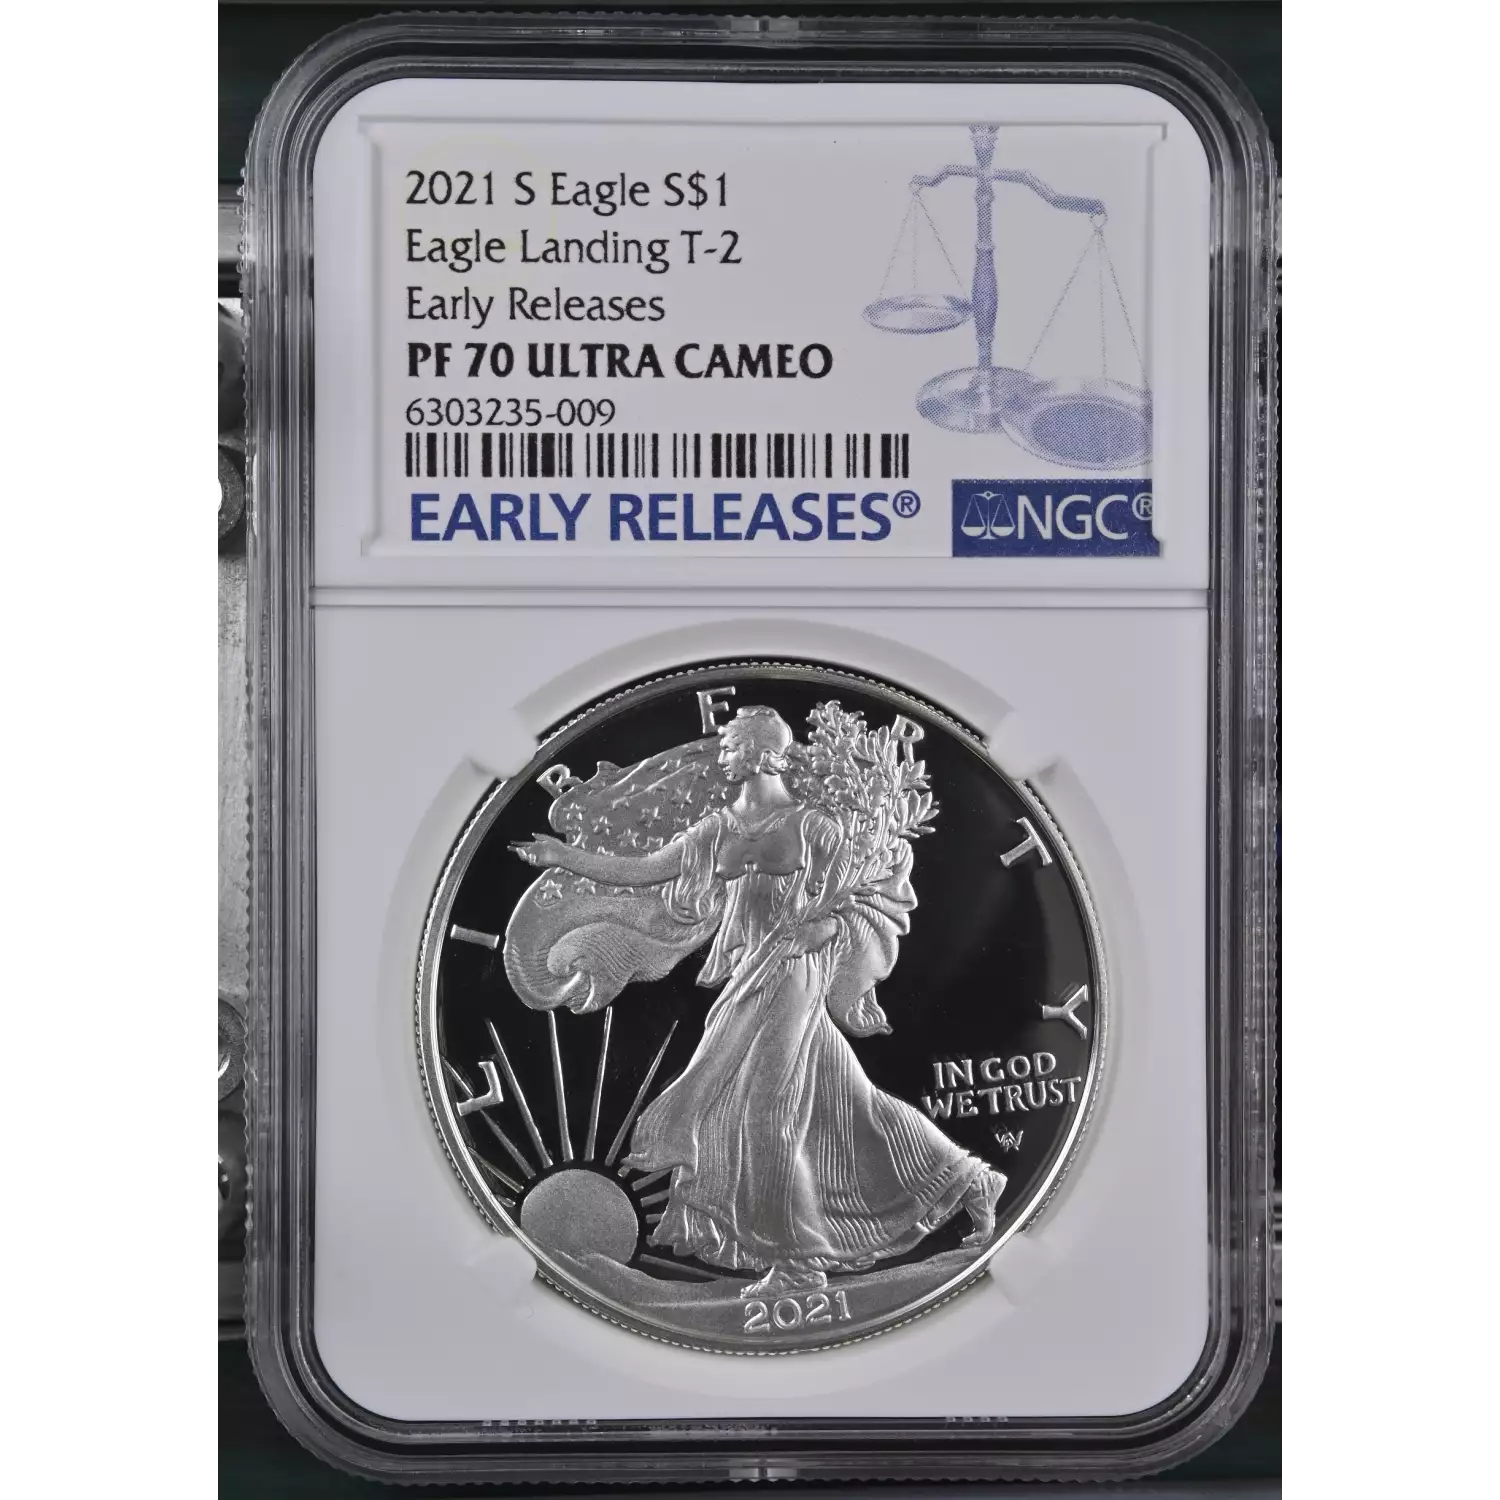 2021 S Eagle Landing T-2 Early Releases ULTRA CAMEO (2)